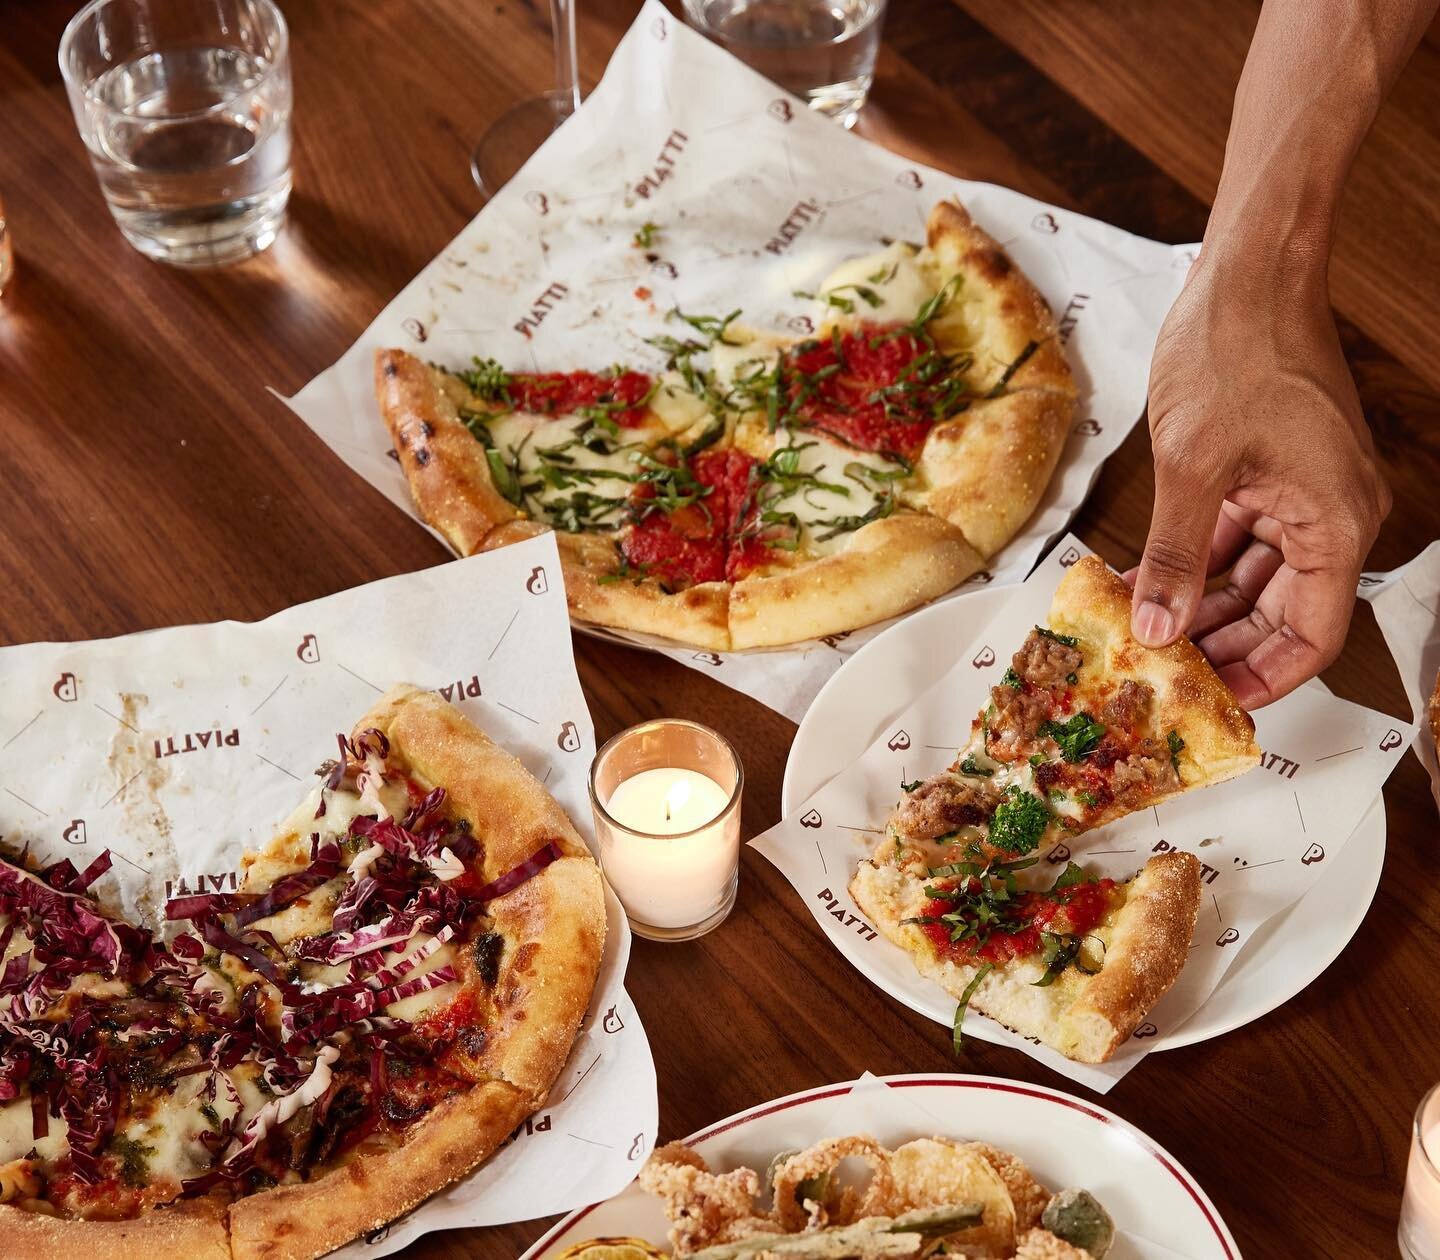 Find your own slice of paradise from Piatti Seattle when it reopens early next month. Here&rsquo;s a peek at what&rsquo;s to come, so get ready. ⁠Tag your dinner date in the comments!⁠
⁠
⁠
⁠
⁠
#eatpiatti #piatti #italianrestaurant #pasta #italiancuis